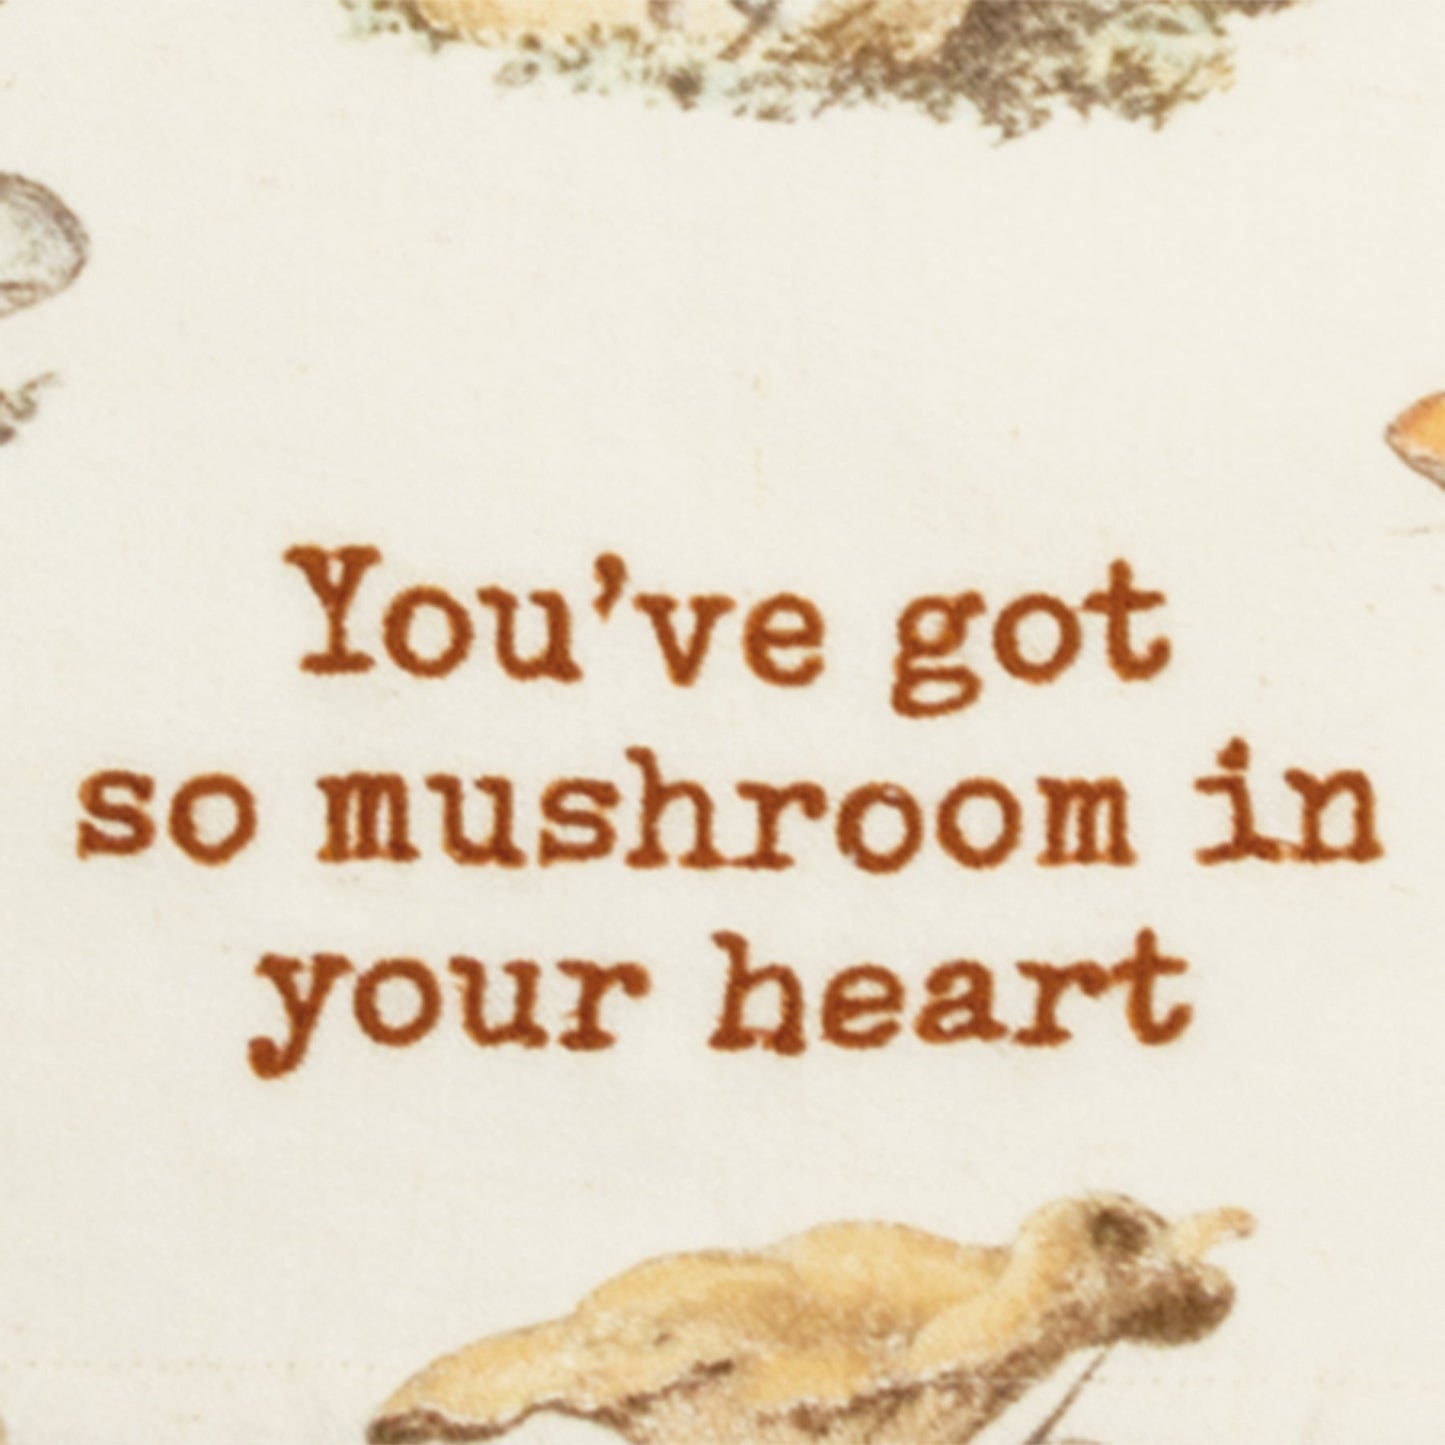 You've Got So Mushroom In Your Heart Funny Dish Cloth Towel | Cotton and Linen | Embroidered Text | 18" x 28"